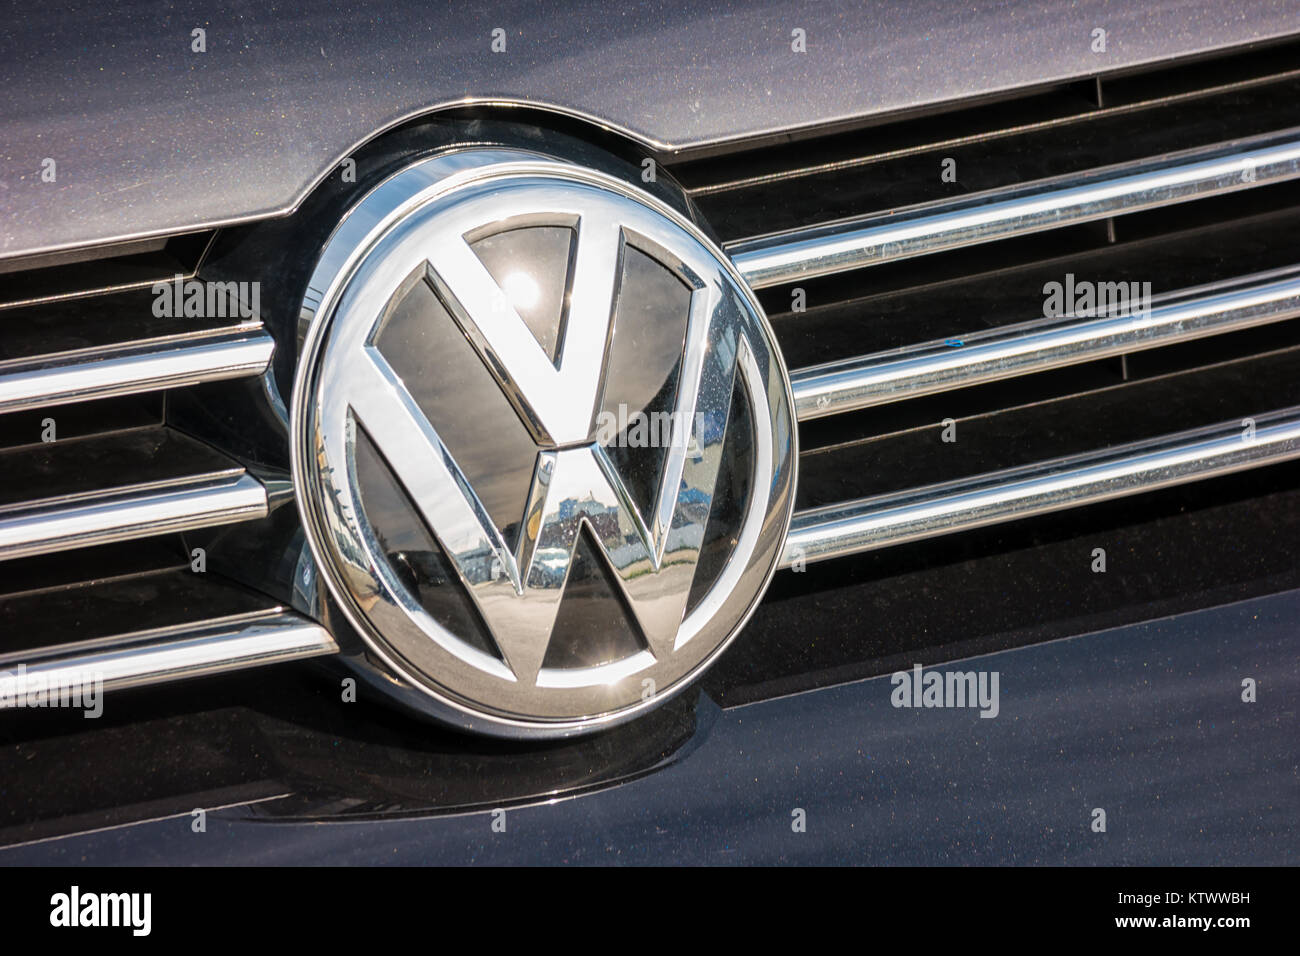 Volkswagen VW plate logo on a car grill. Volkswagen is a famous European car manufacturer company based on Germany Stock Photo